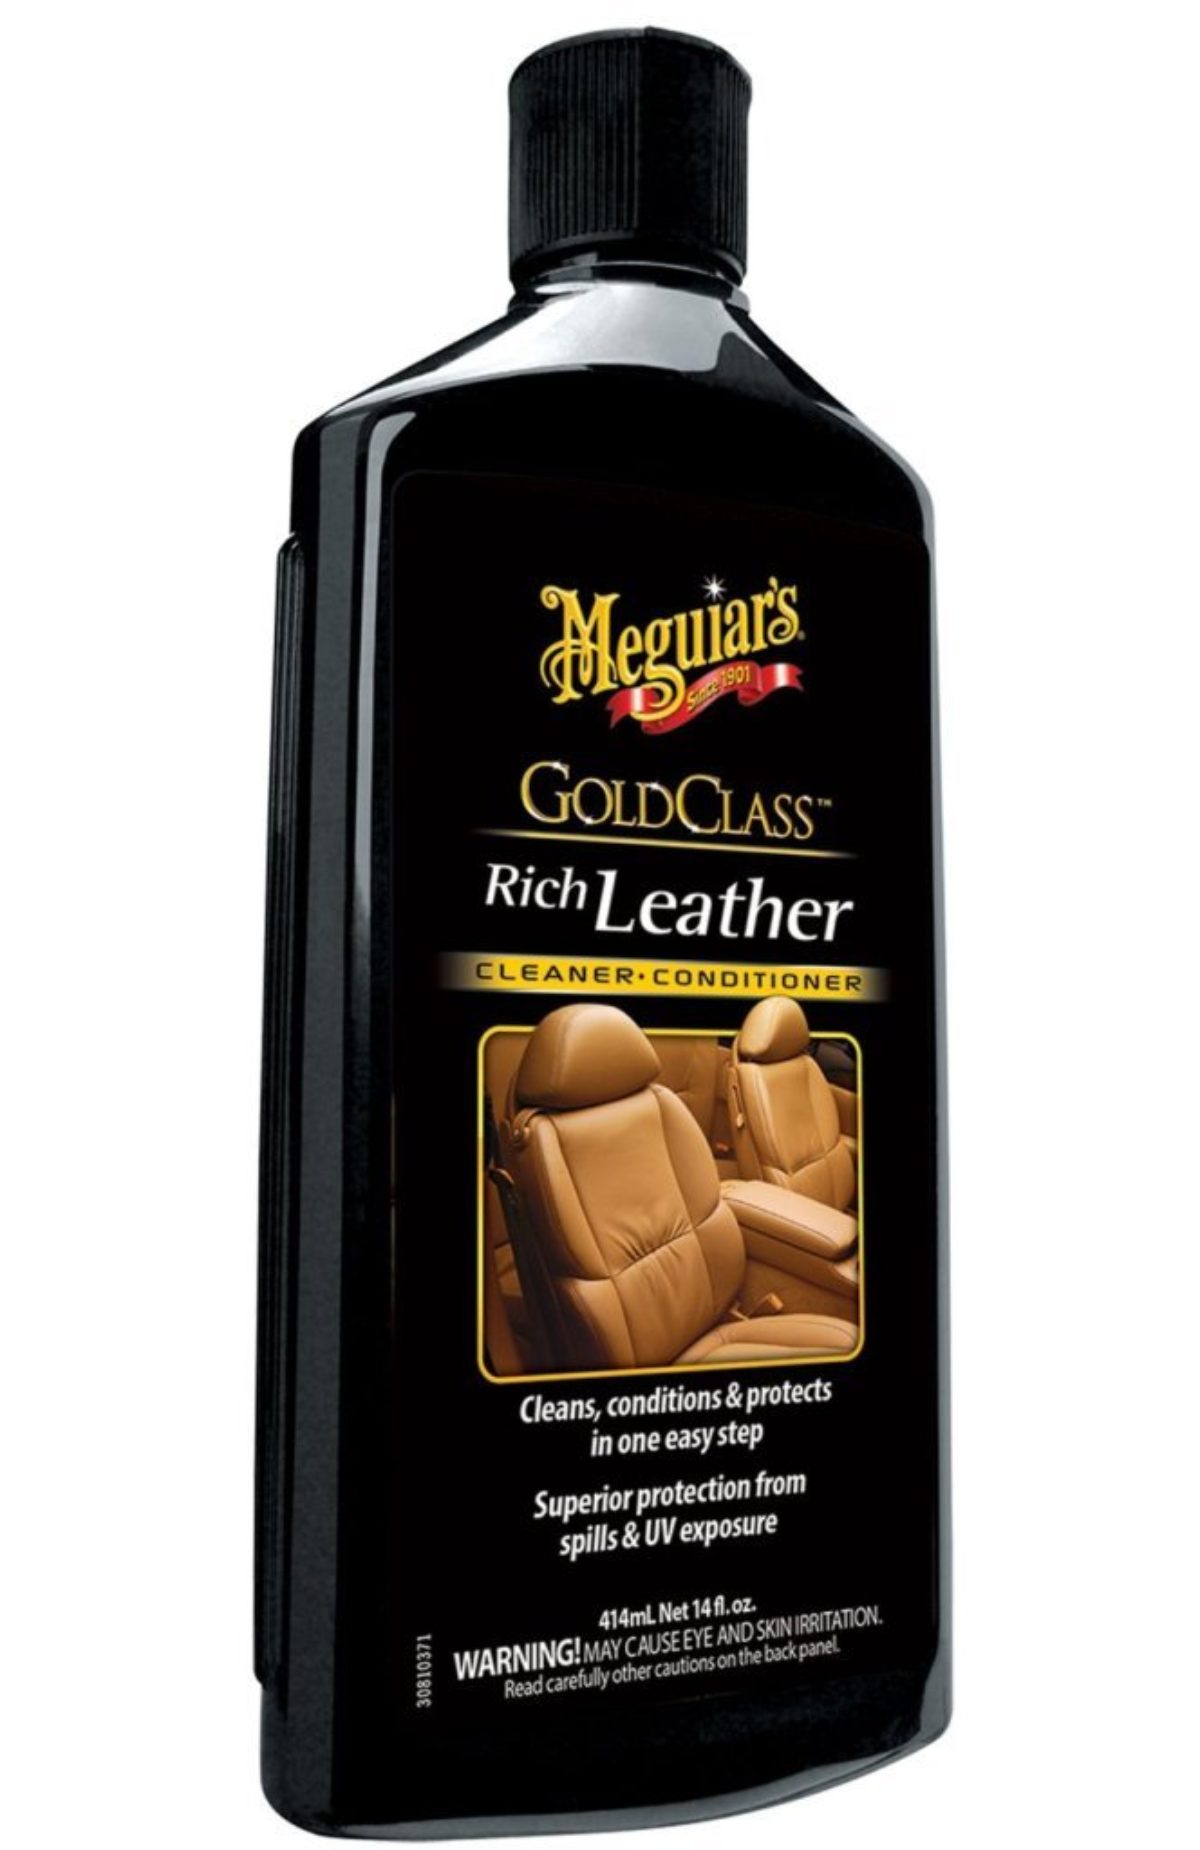 Meguiars Gold Class Rich Leather Cleaner/Conditioner, 400 ml